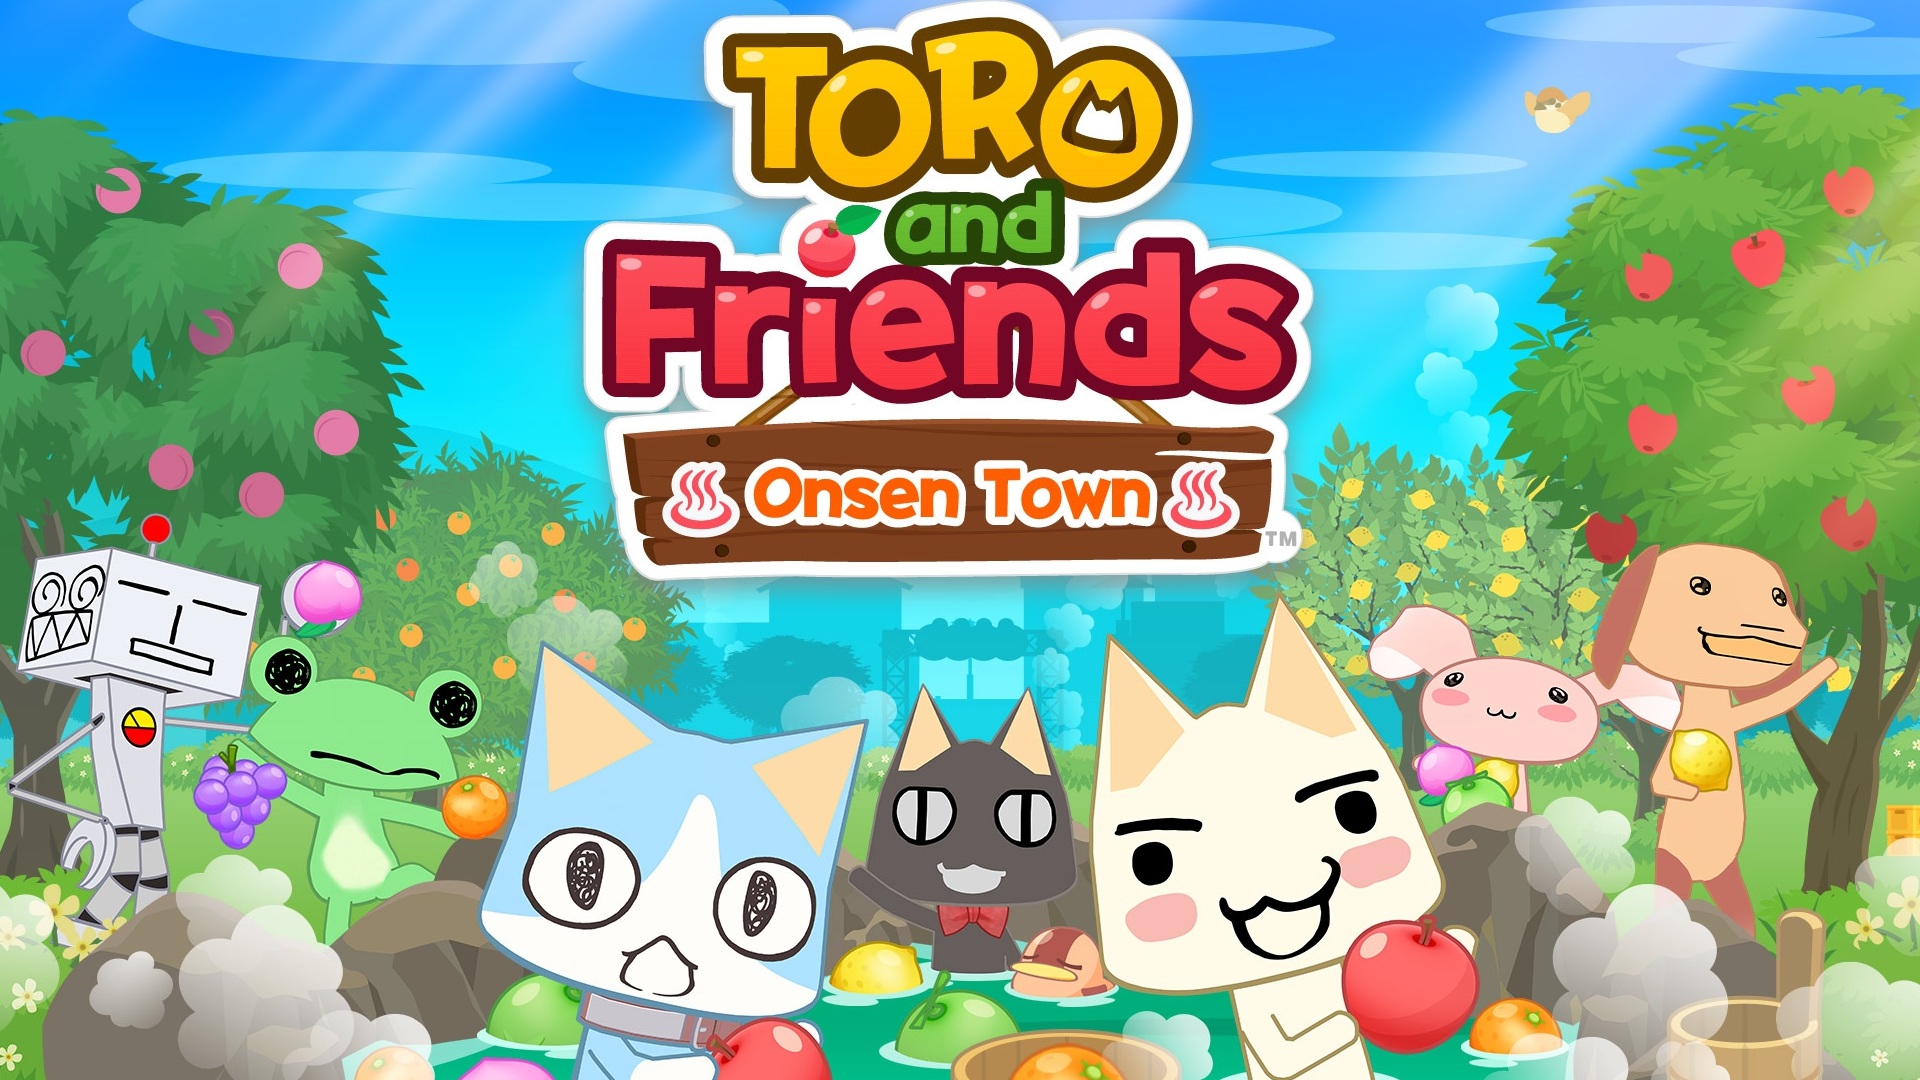 Toro and Friends Onsen Town